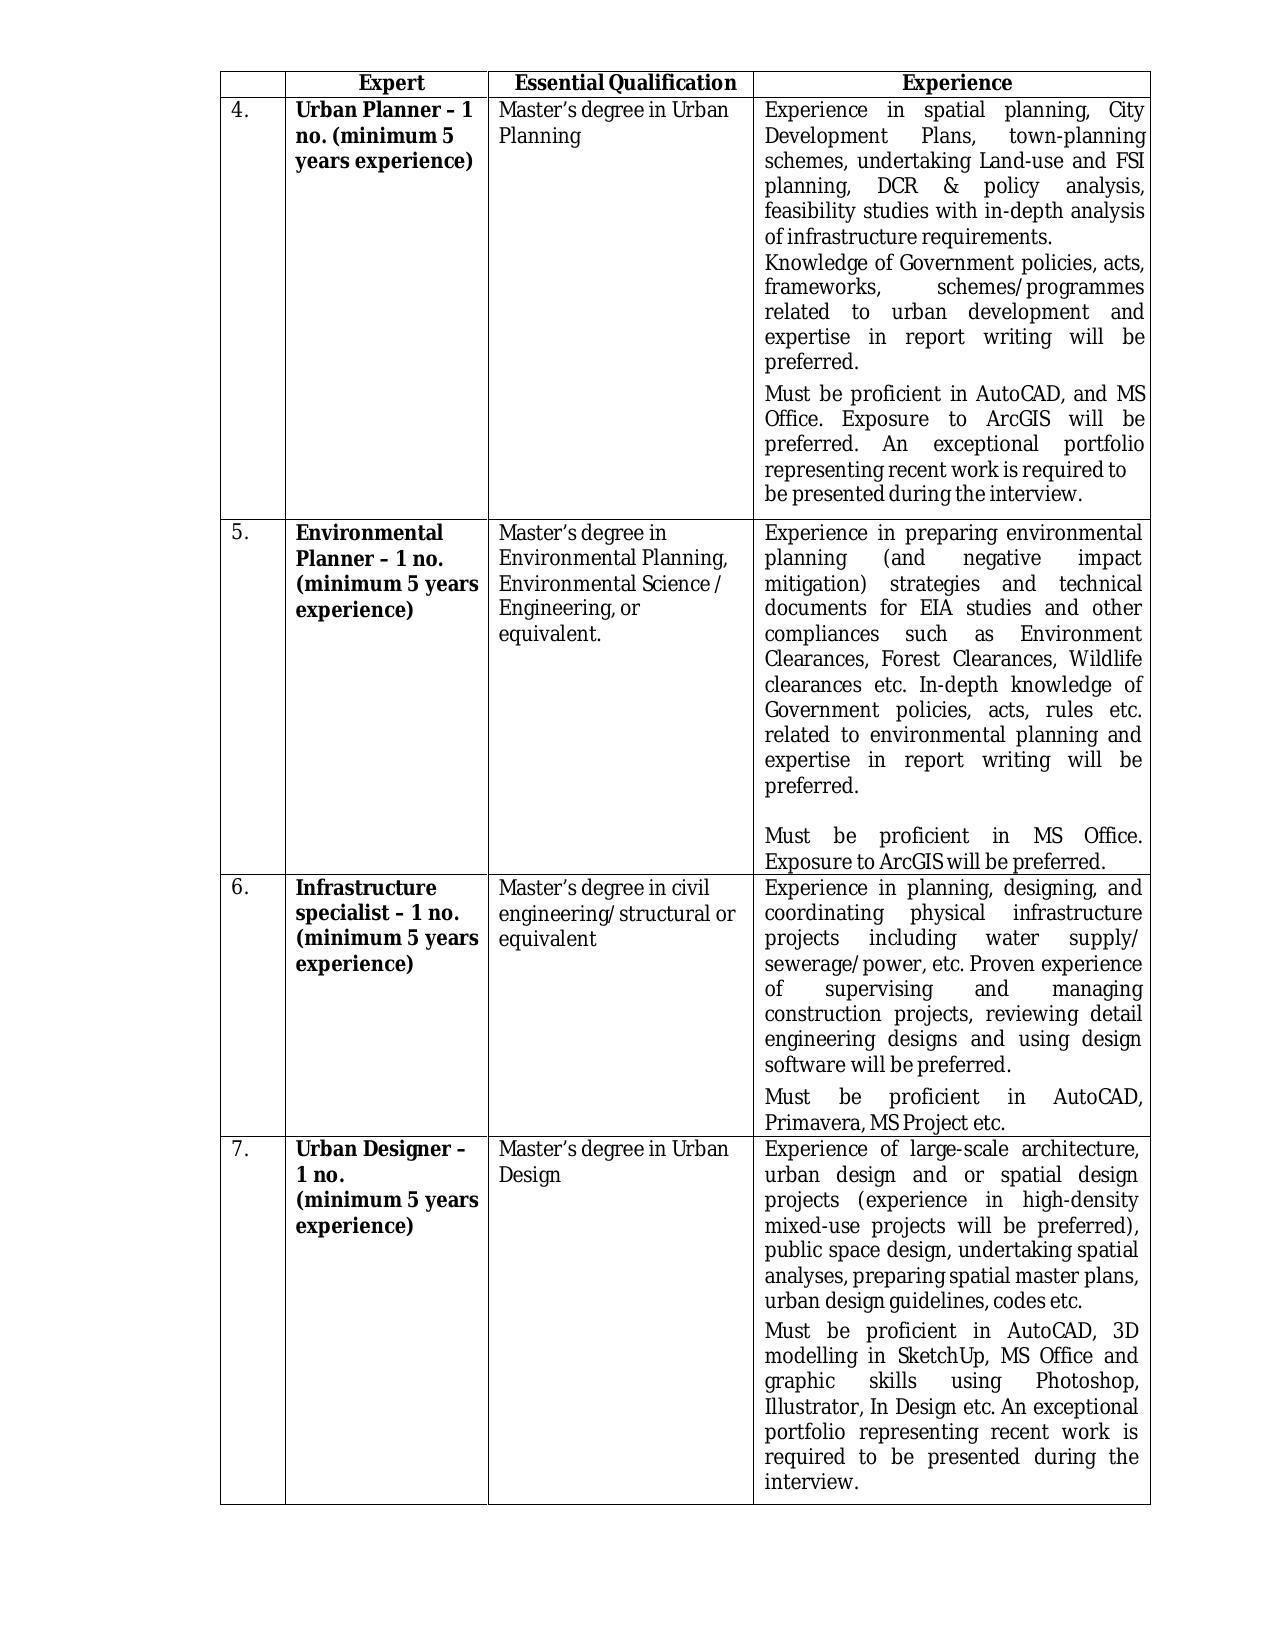 ANIIDCO Invites Application for 18 Environmental Planner, More Vacancies Recruitment 2022 - Page 13